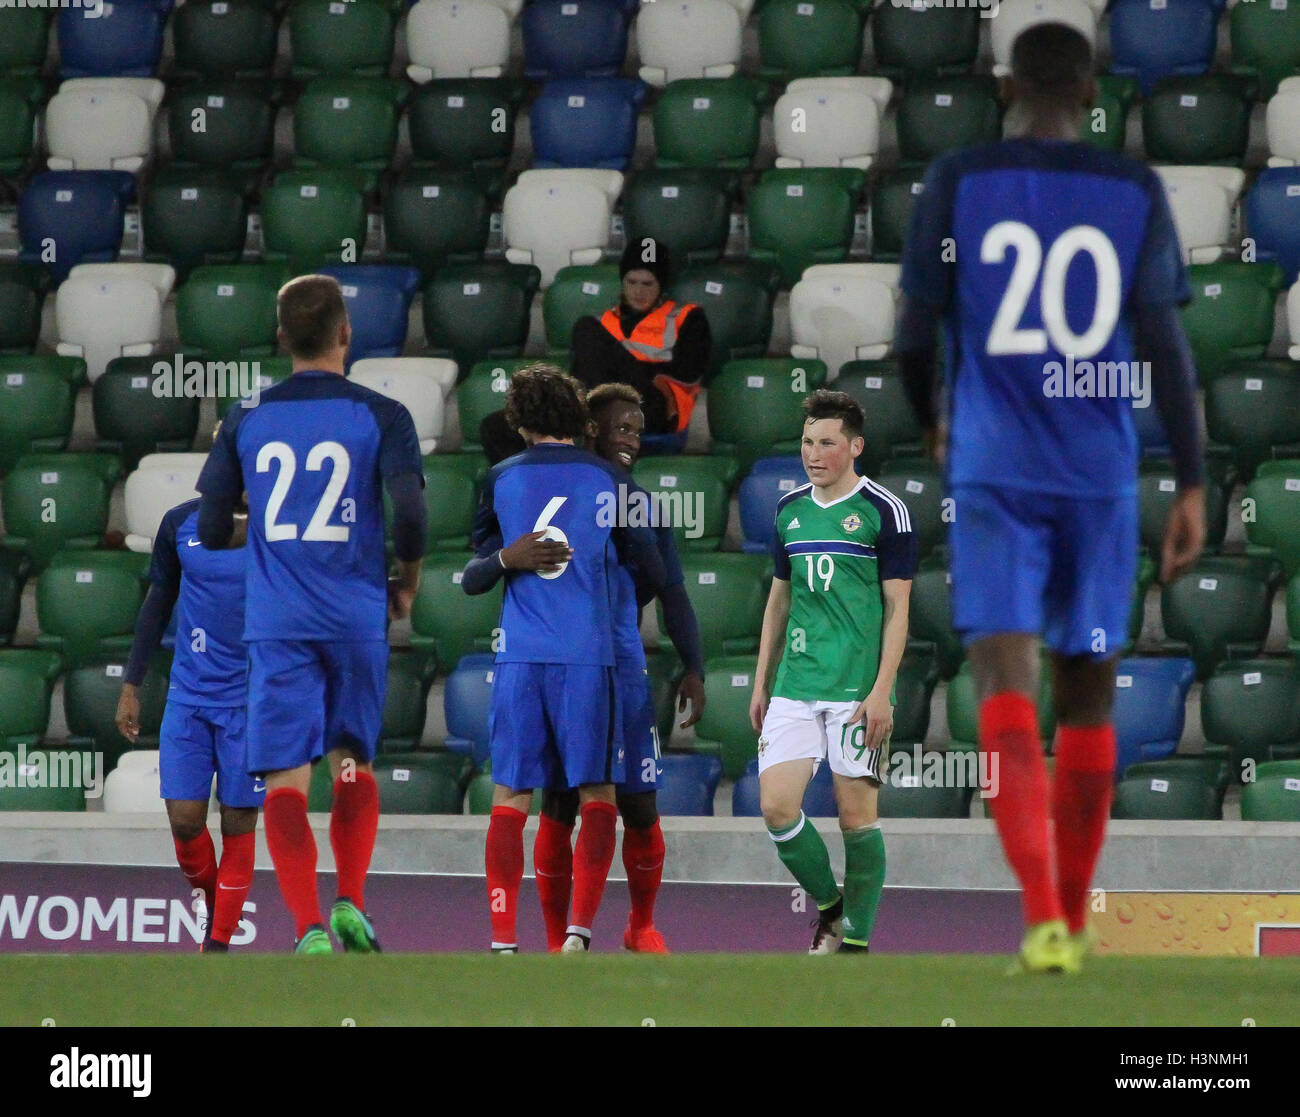 National Football Stadium at Windsor Park, Belfast, Northern Ireland, 11 Oct 2016. Moussa Dembele is congratulated by Adrien Rabiot (6) after scoring France's third goal in the 0-3 win. David Hunter/Alamy Live News. Stock Photo